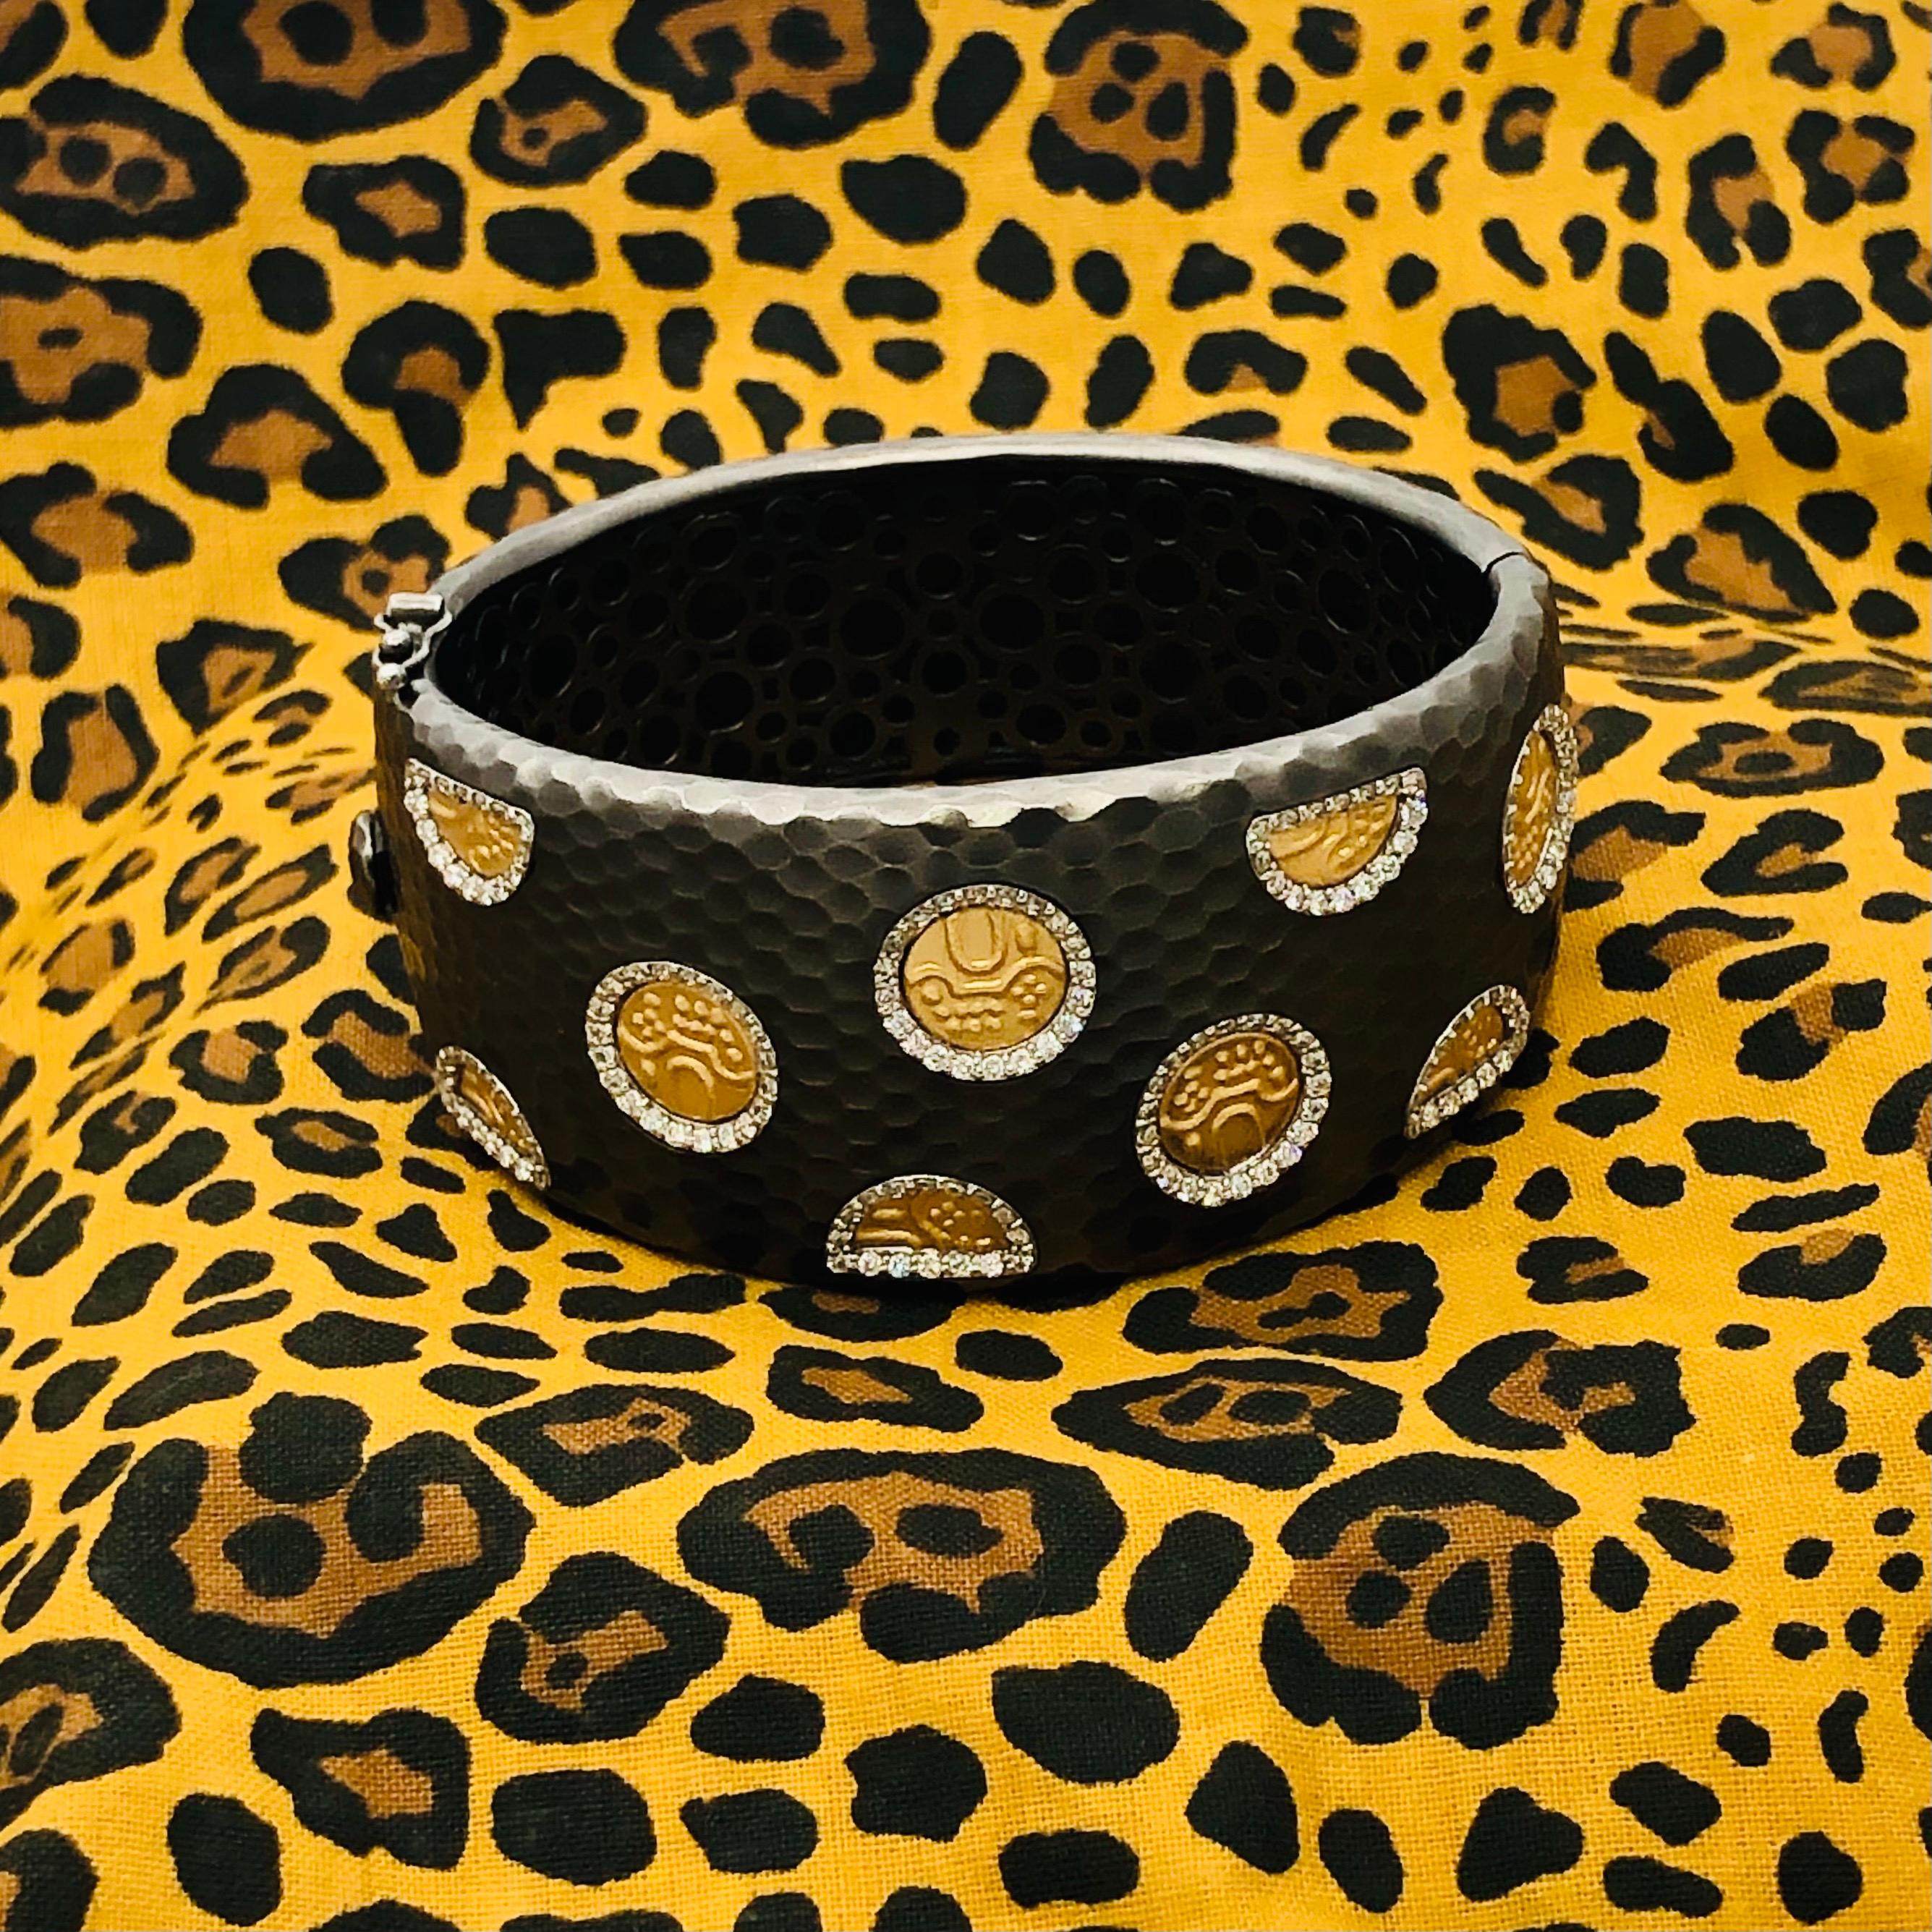 Brilliant Cut Roberto Coin Hammered Cuff Bracelet with Gold Motifs and Diamonds